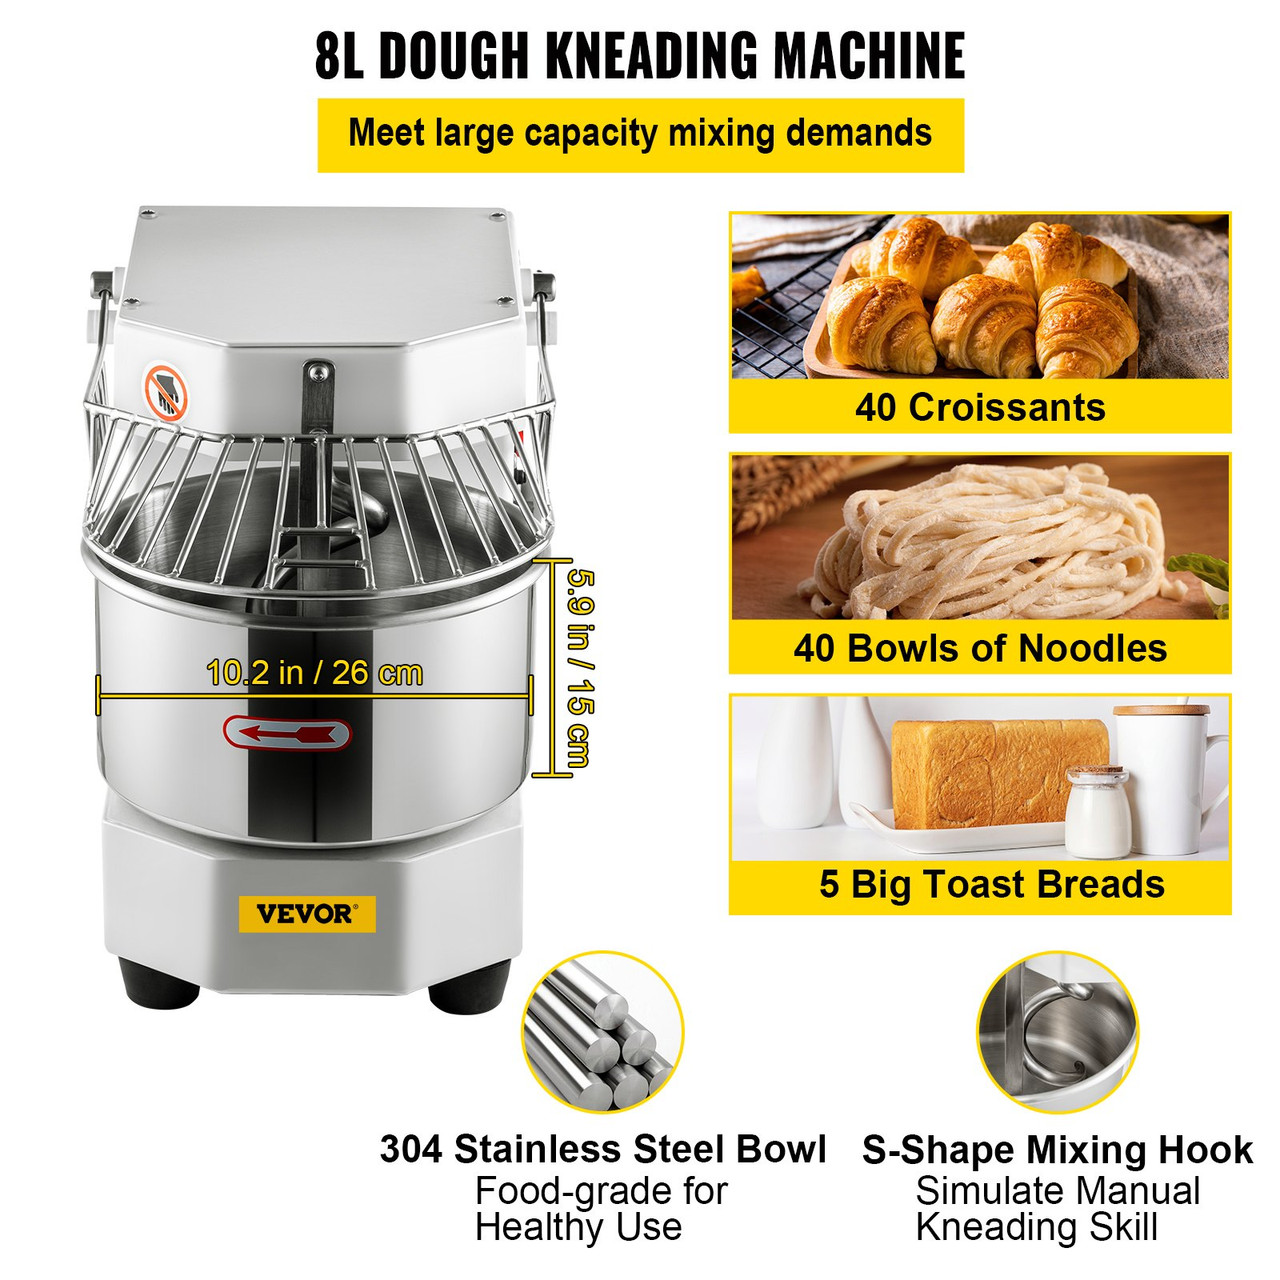 Commercial Food Mixer, 7.3Qt Capacity, 450W Dual Rotating Dough Kneading Machine with Food-grade Stainless Steel Bowl, Security Shield & Timer Included, Baking Equipment for Restaurant Pizzeria